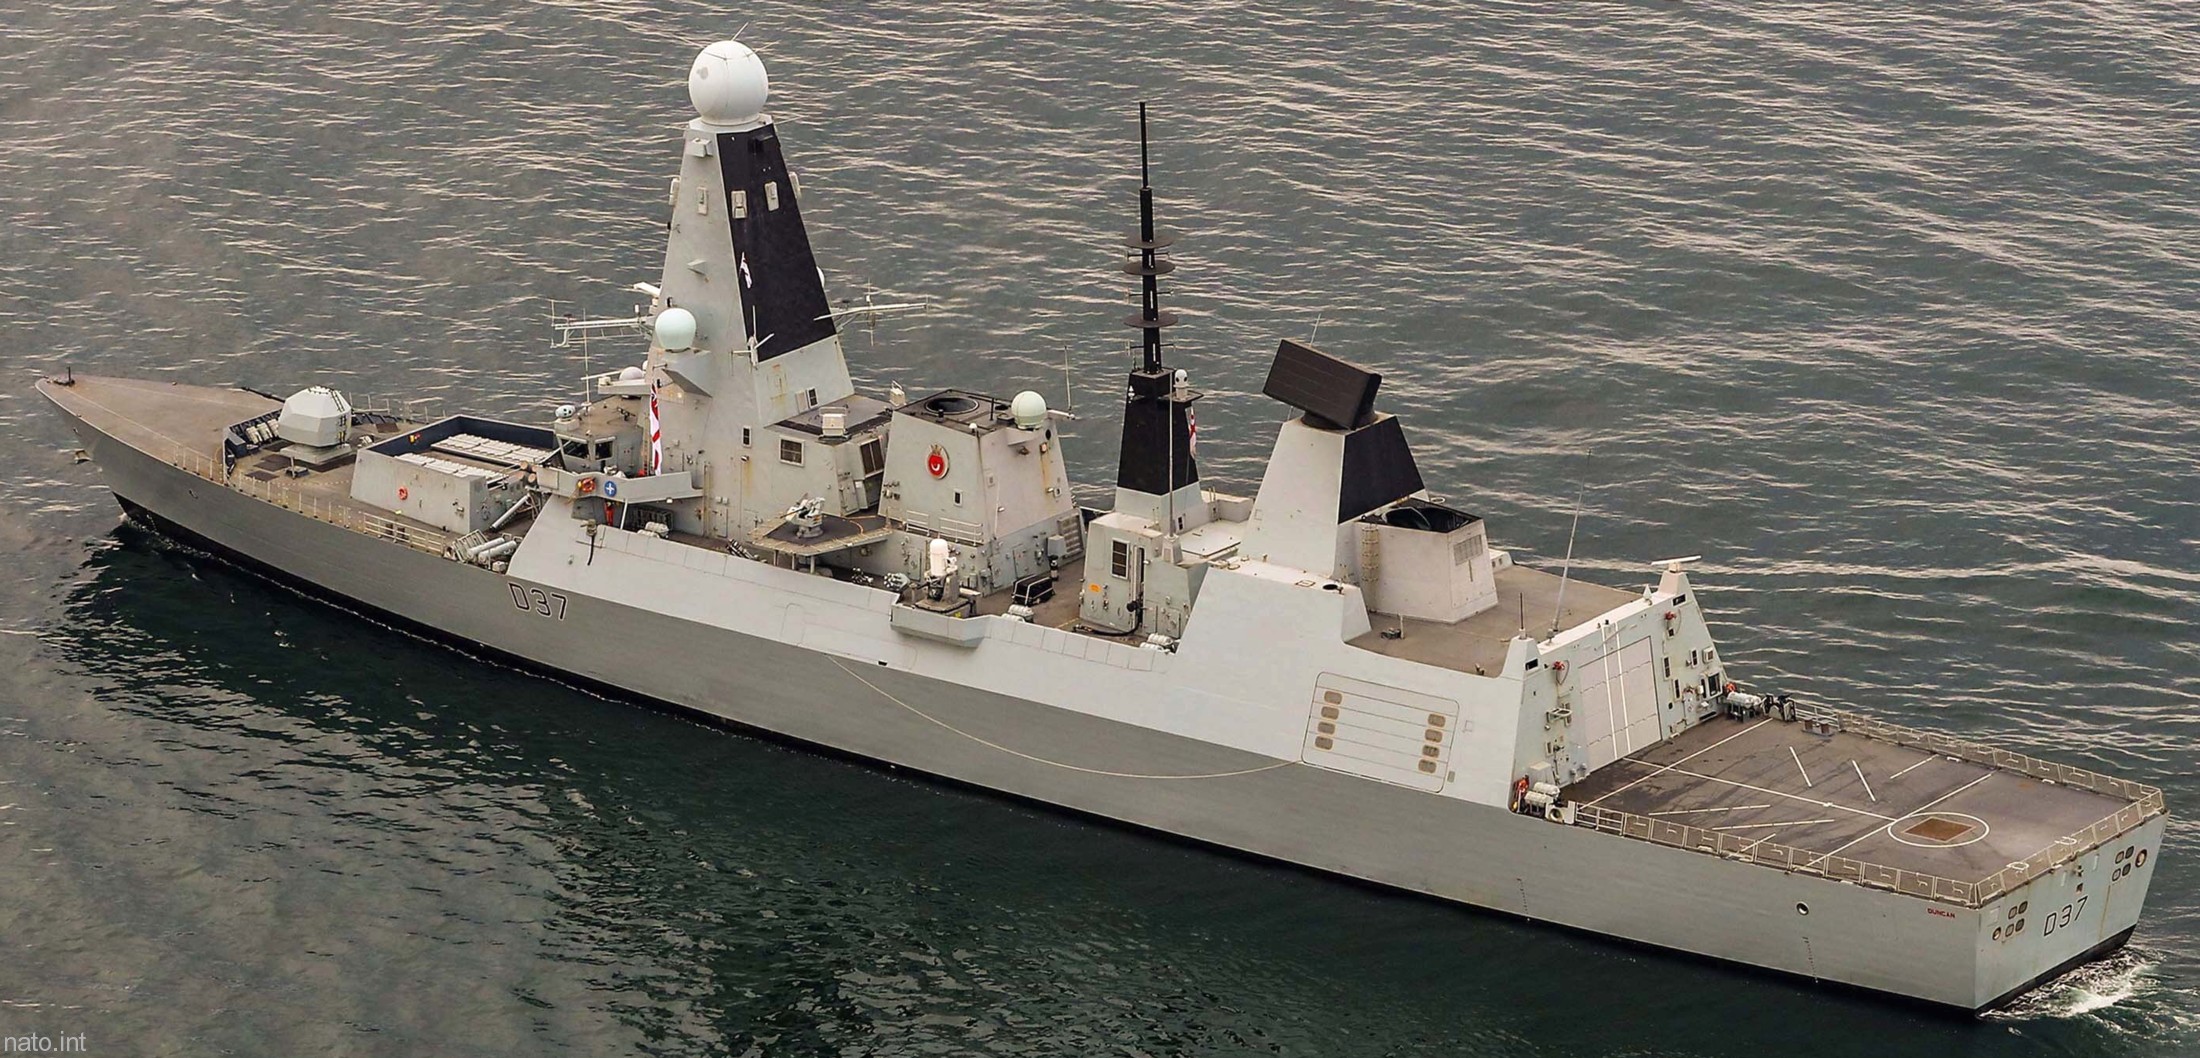 d37 hms duncan d-37 type 45 daring class guided missile destroyer ddg royal navy sea viper 32